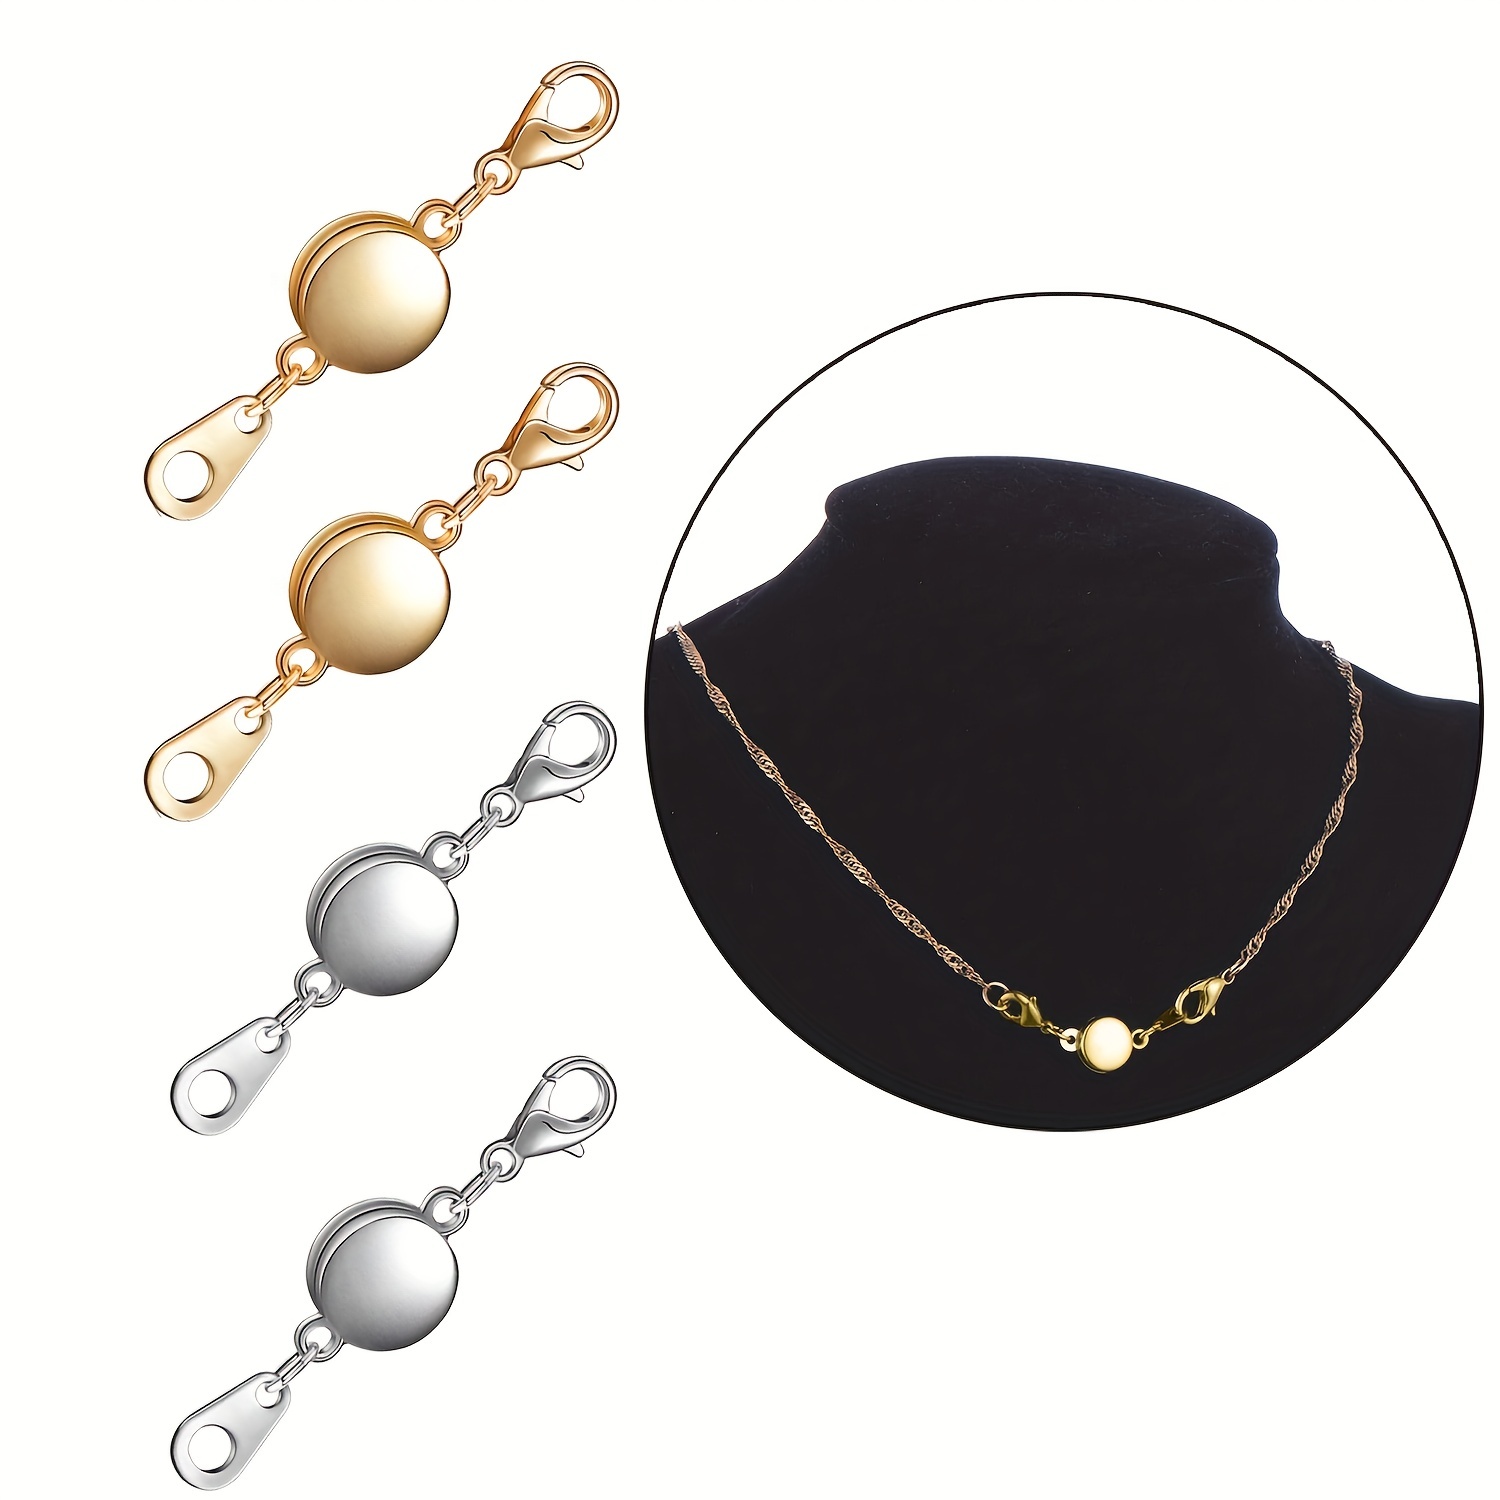 Qulltk Magnetic Necklace Extender Silver and 14K Gold Adjustable Chain  Extenders for Necklaces,Magnetic Necklace Clasps and Closures with Extender